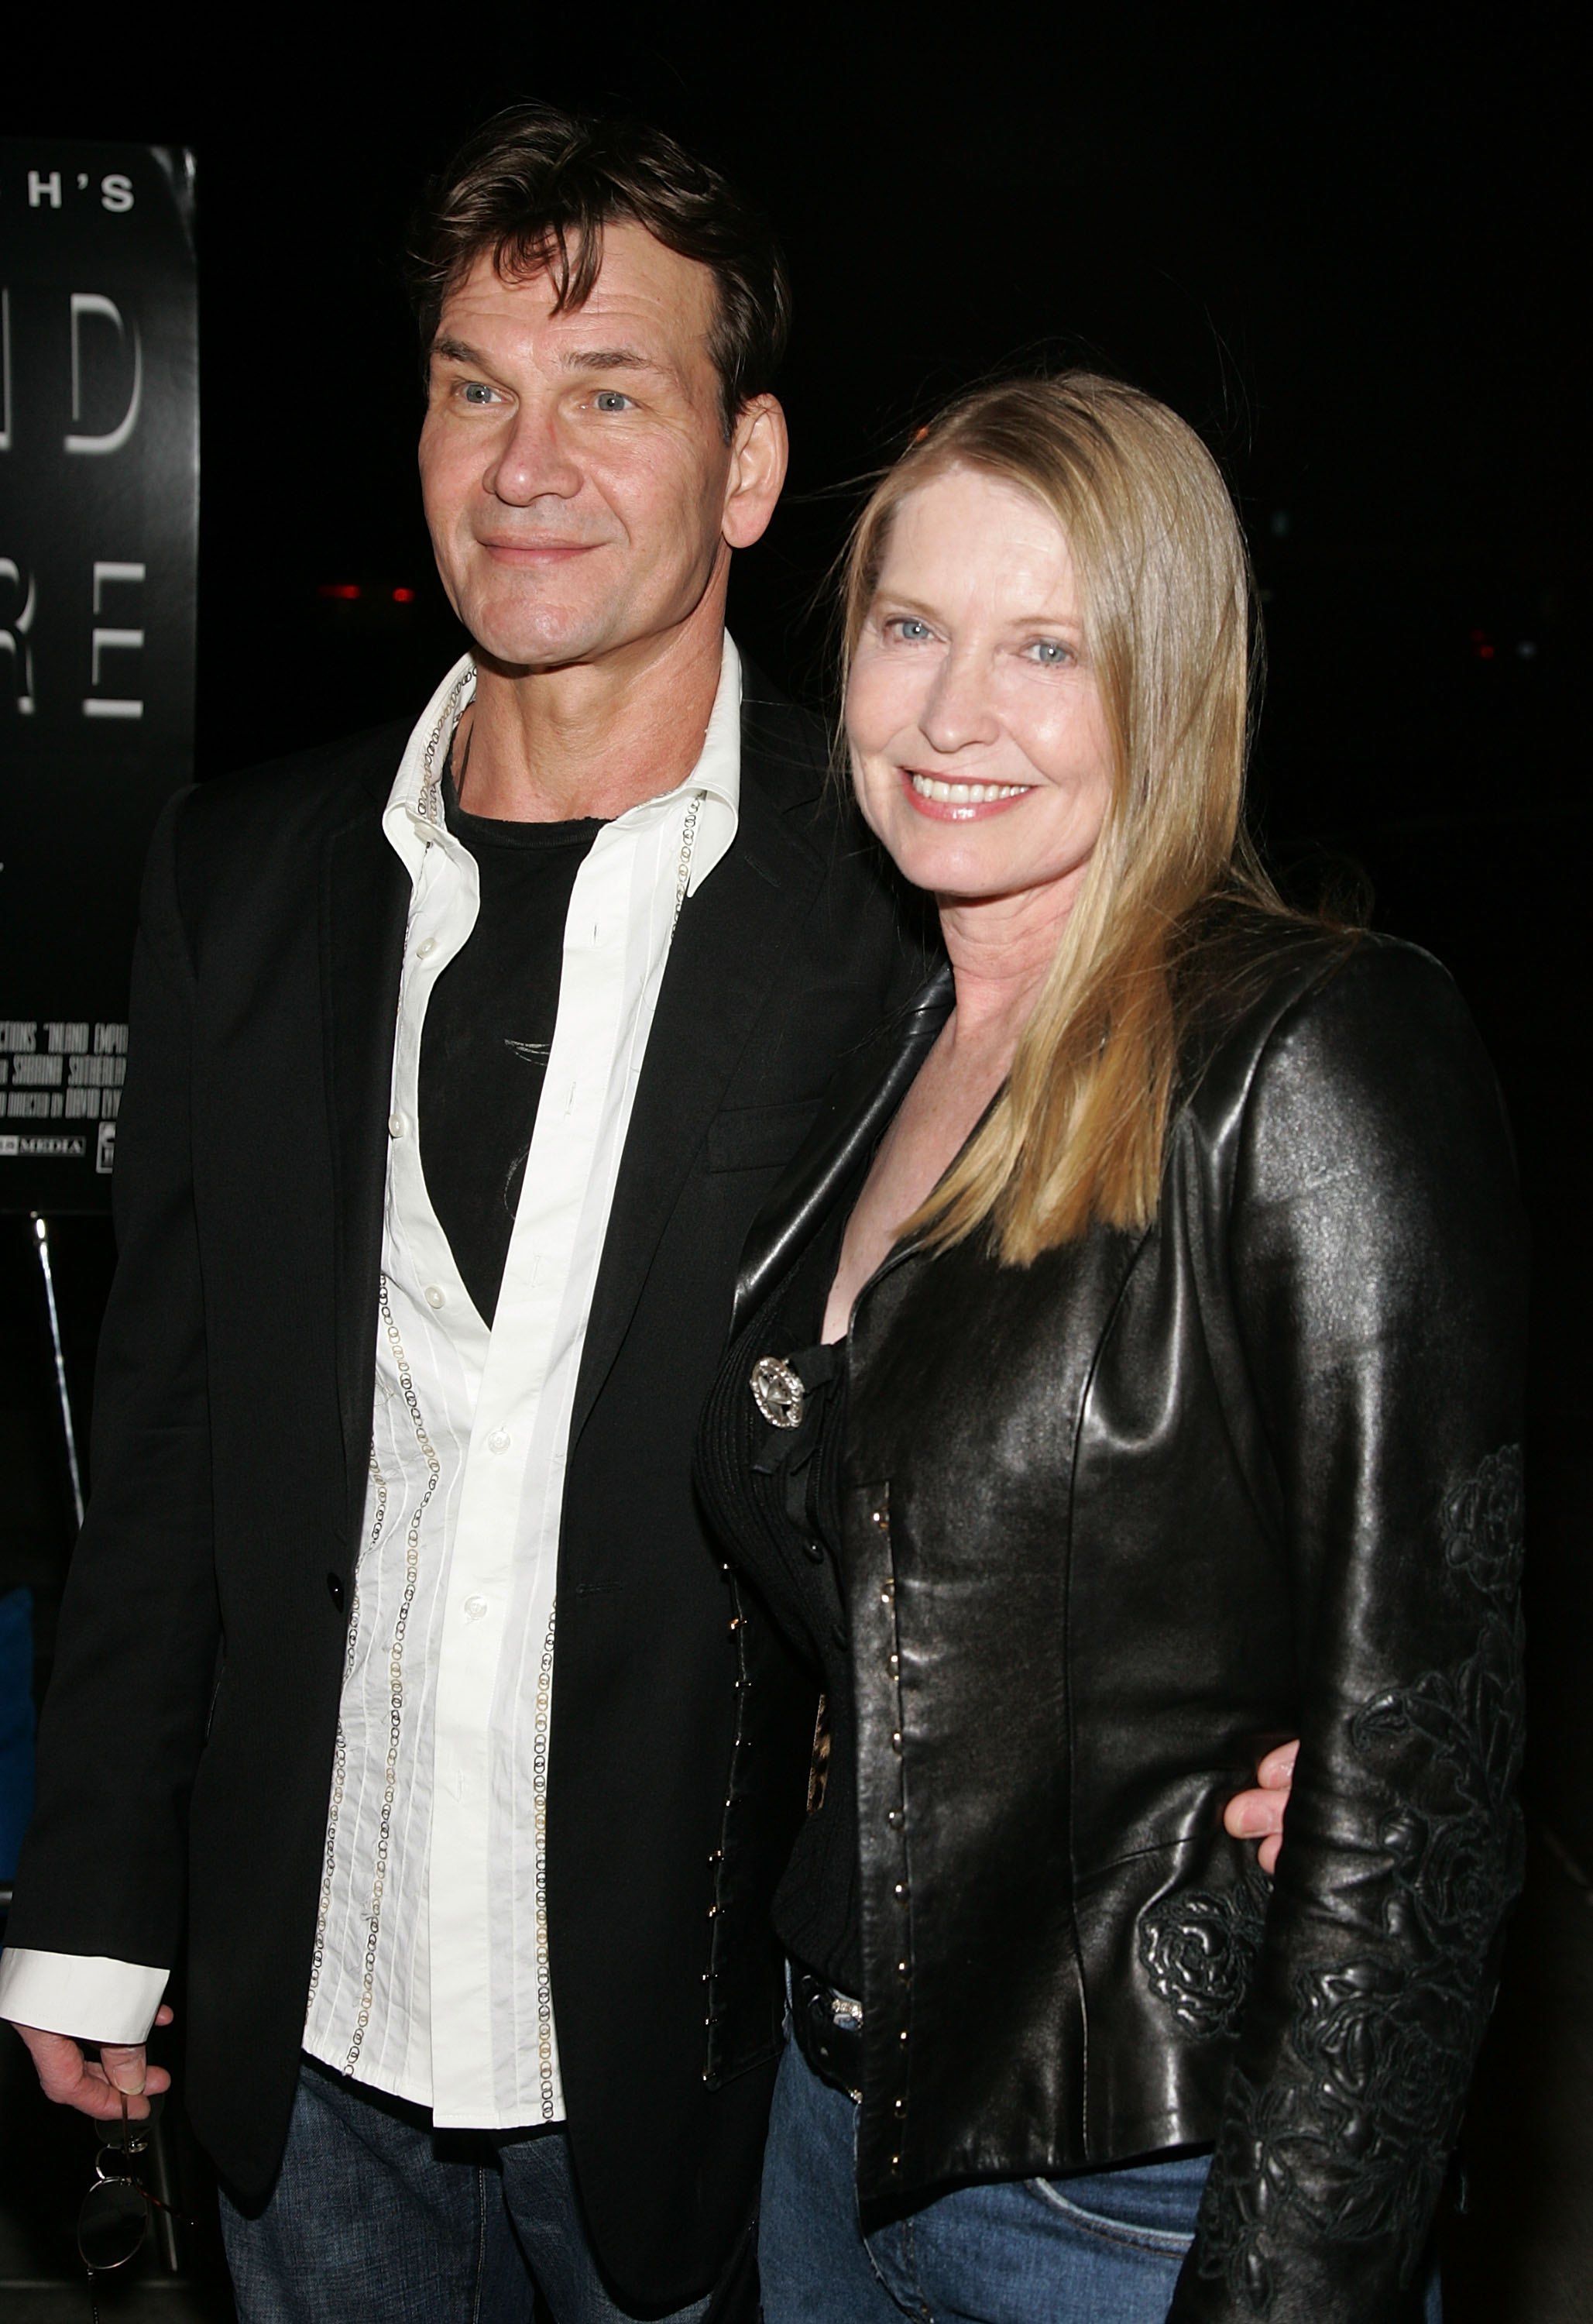 Patrick Swayze and Lisa Niemi at the Los Angeles Premiere Of "Inland Empire" held at the LACMA Museum on December 9, 2006 in Los Angeles, California. | Source: Getty Images